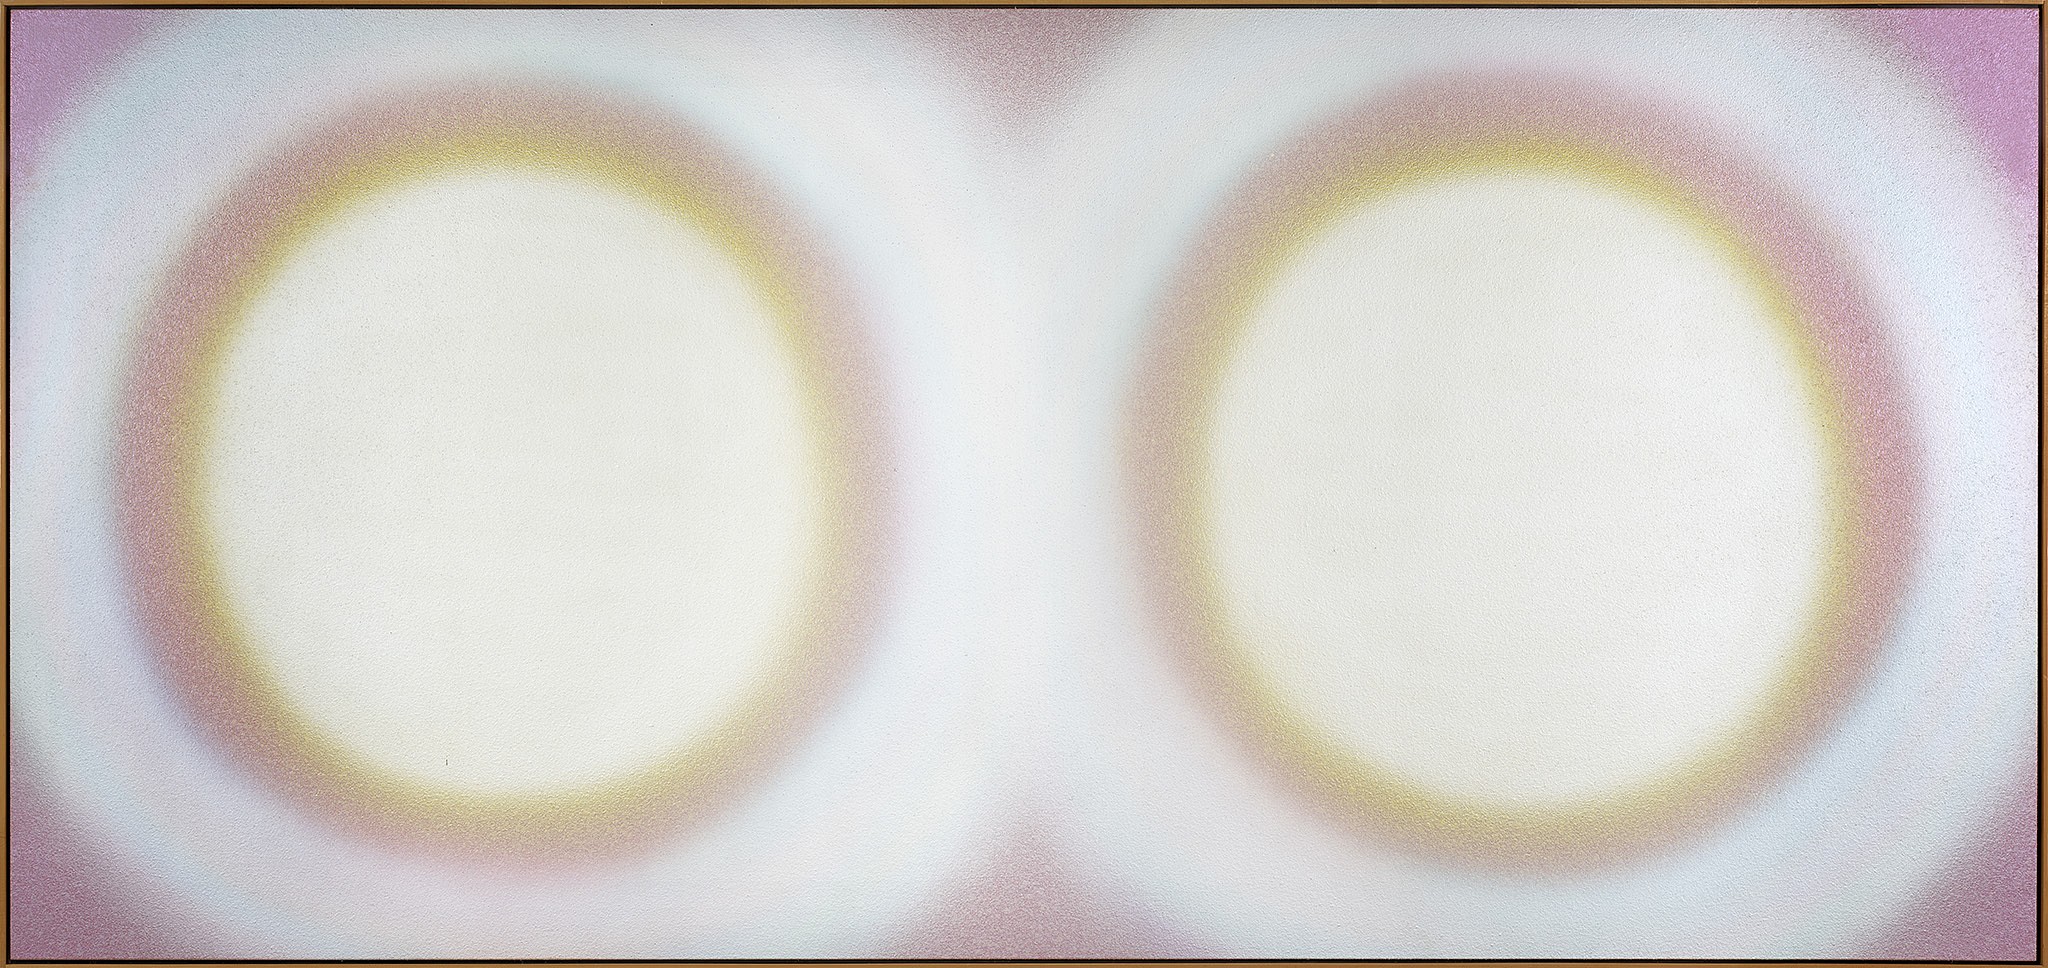 ARTRA Advisory | Kyrene Chen: Private Visit to Berry Campbell Gallery: Dan Christensen's Spray Paintings